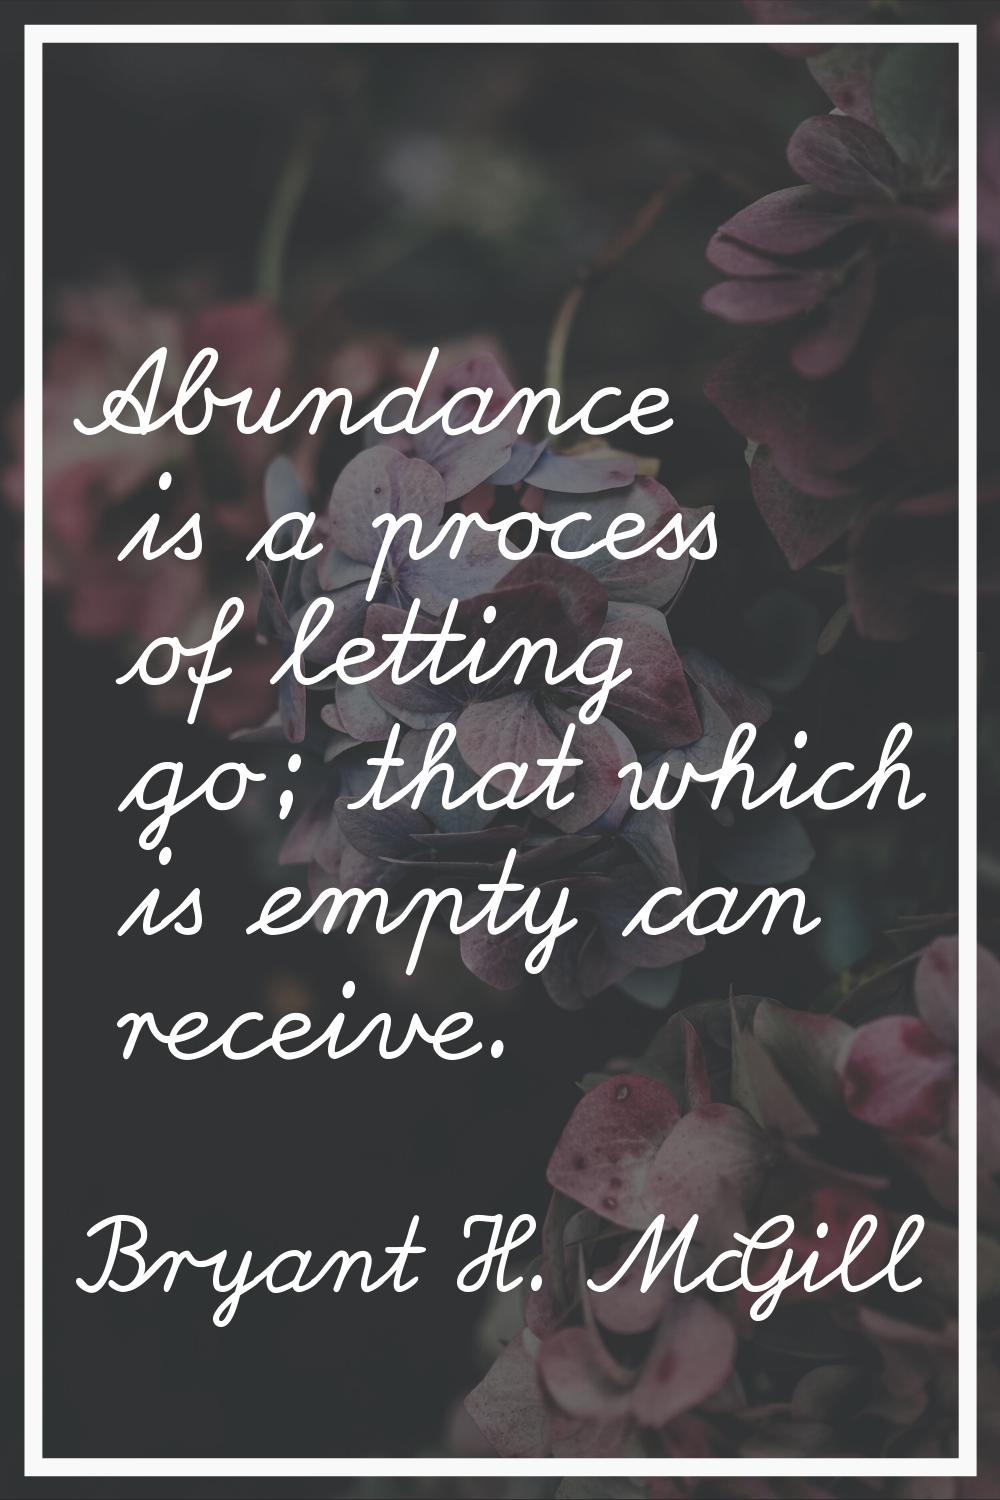 Abundance is a process of letting go; that which is empty can receive.